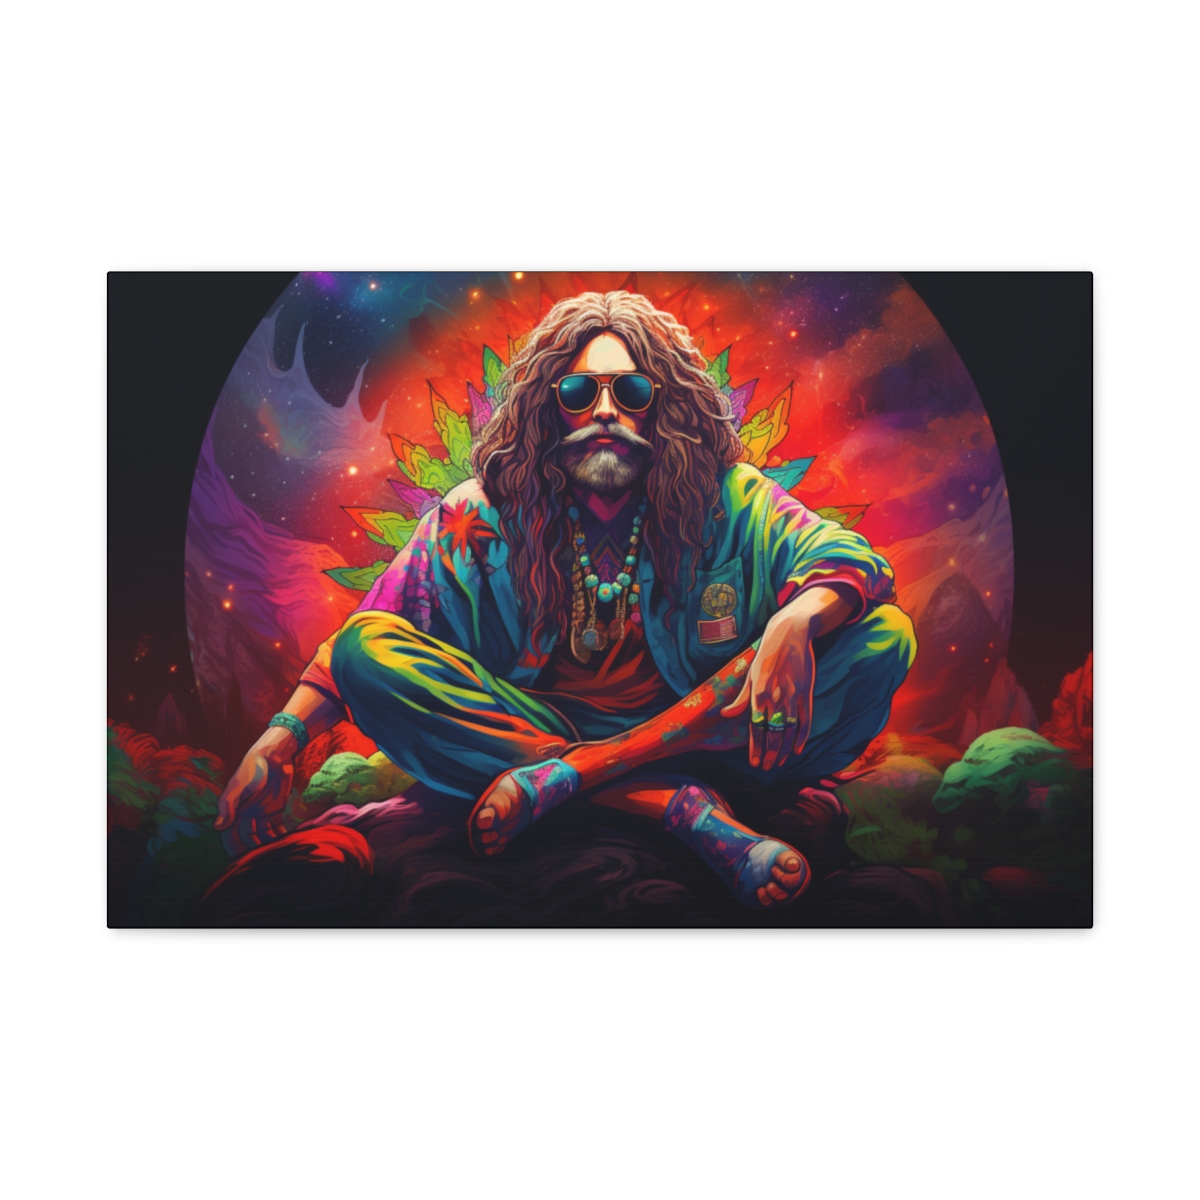 Trippy Hippie Art Canvas Print: Are You Ready To Join The Dance